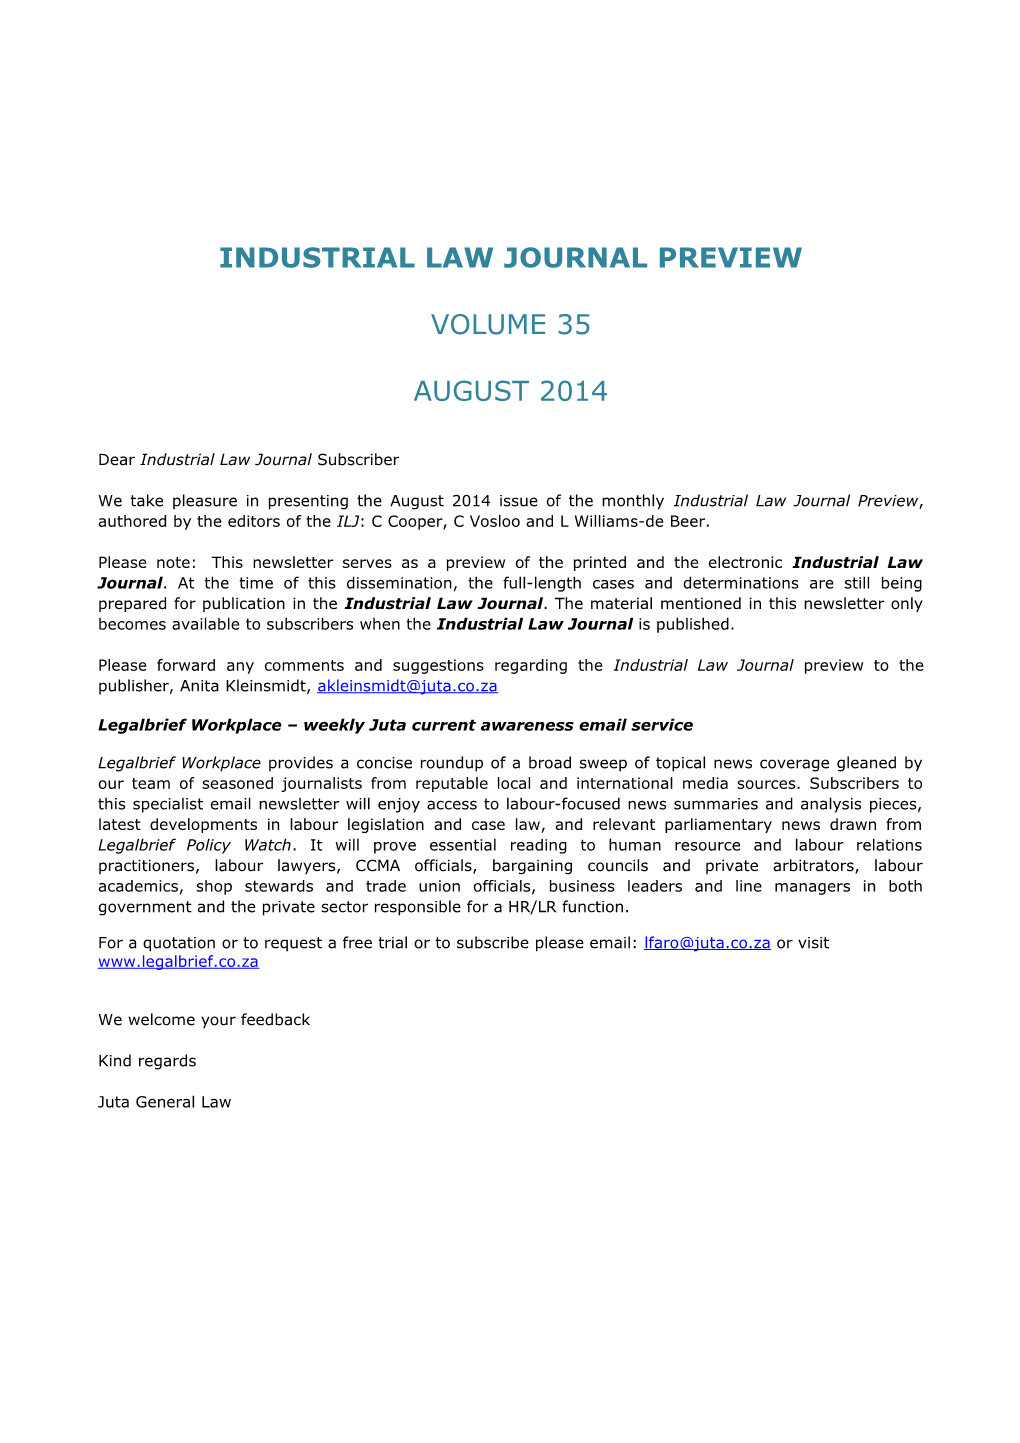 Industrial Law Journal Preview